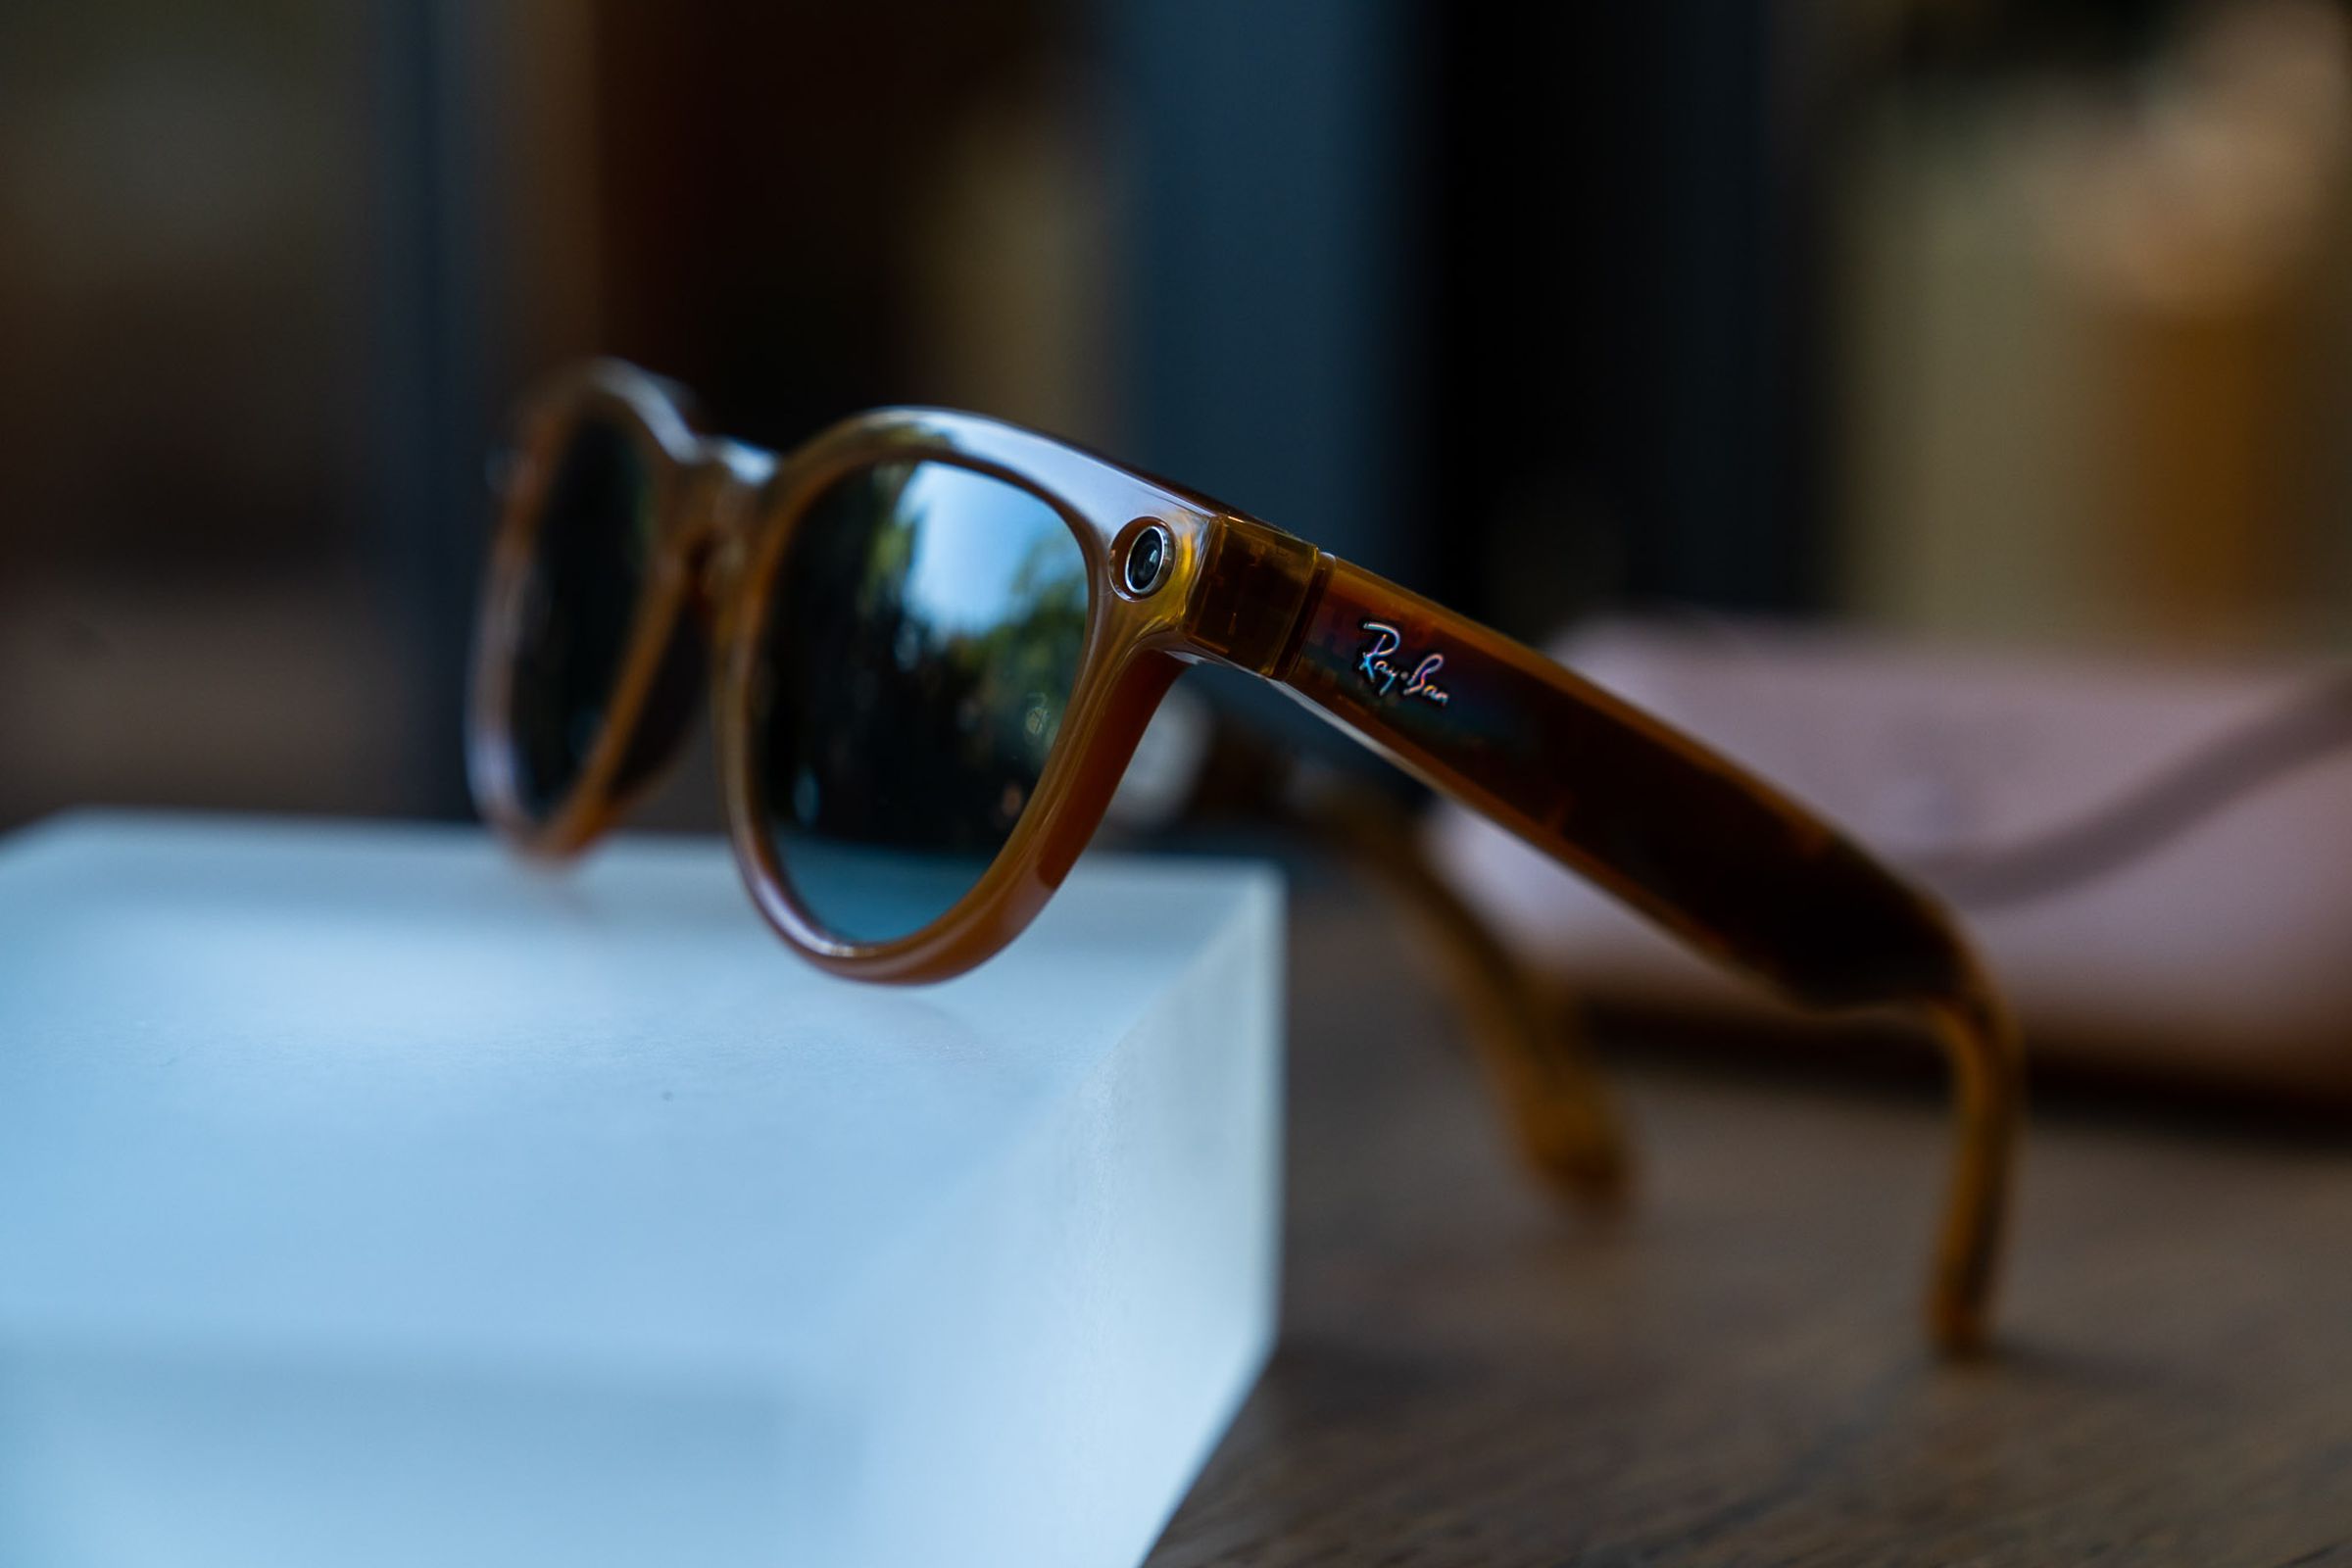 Ray-Ban Meta Smart Glasses propped up on a glass block